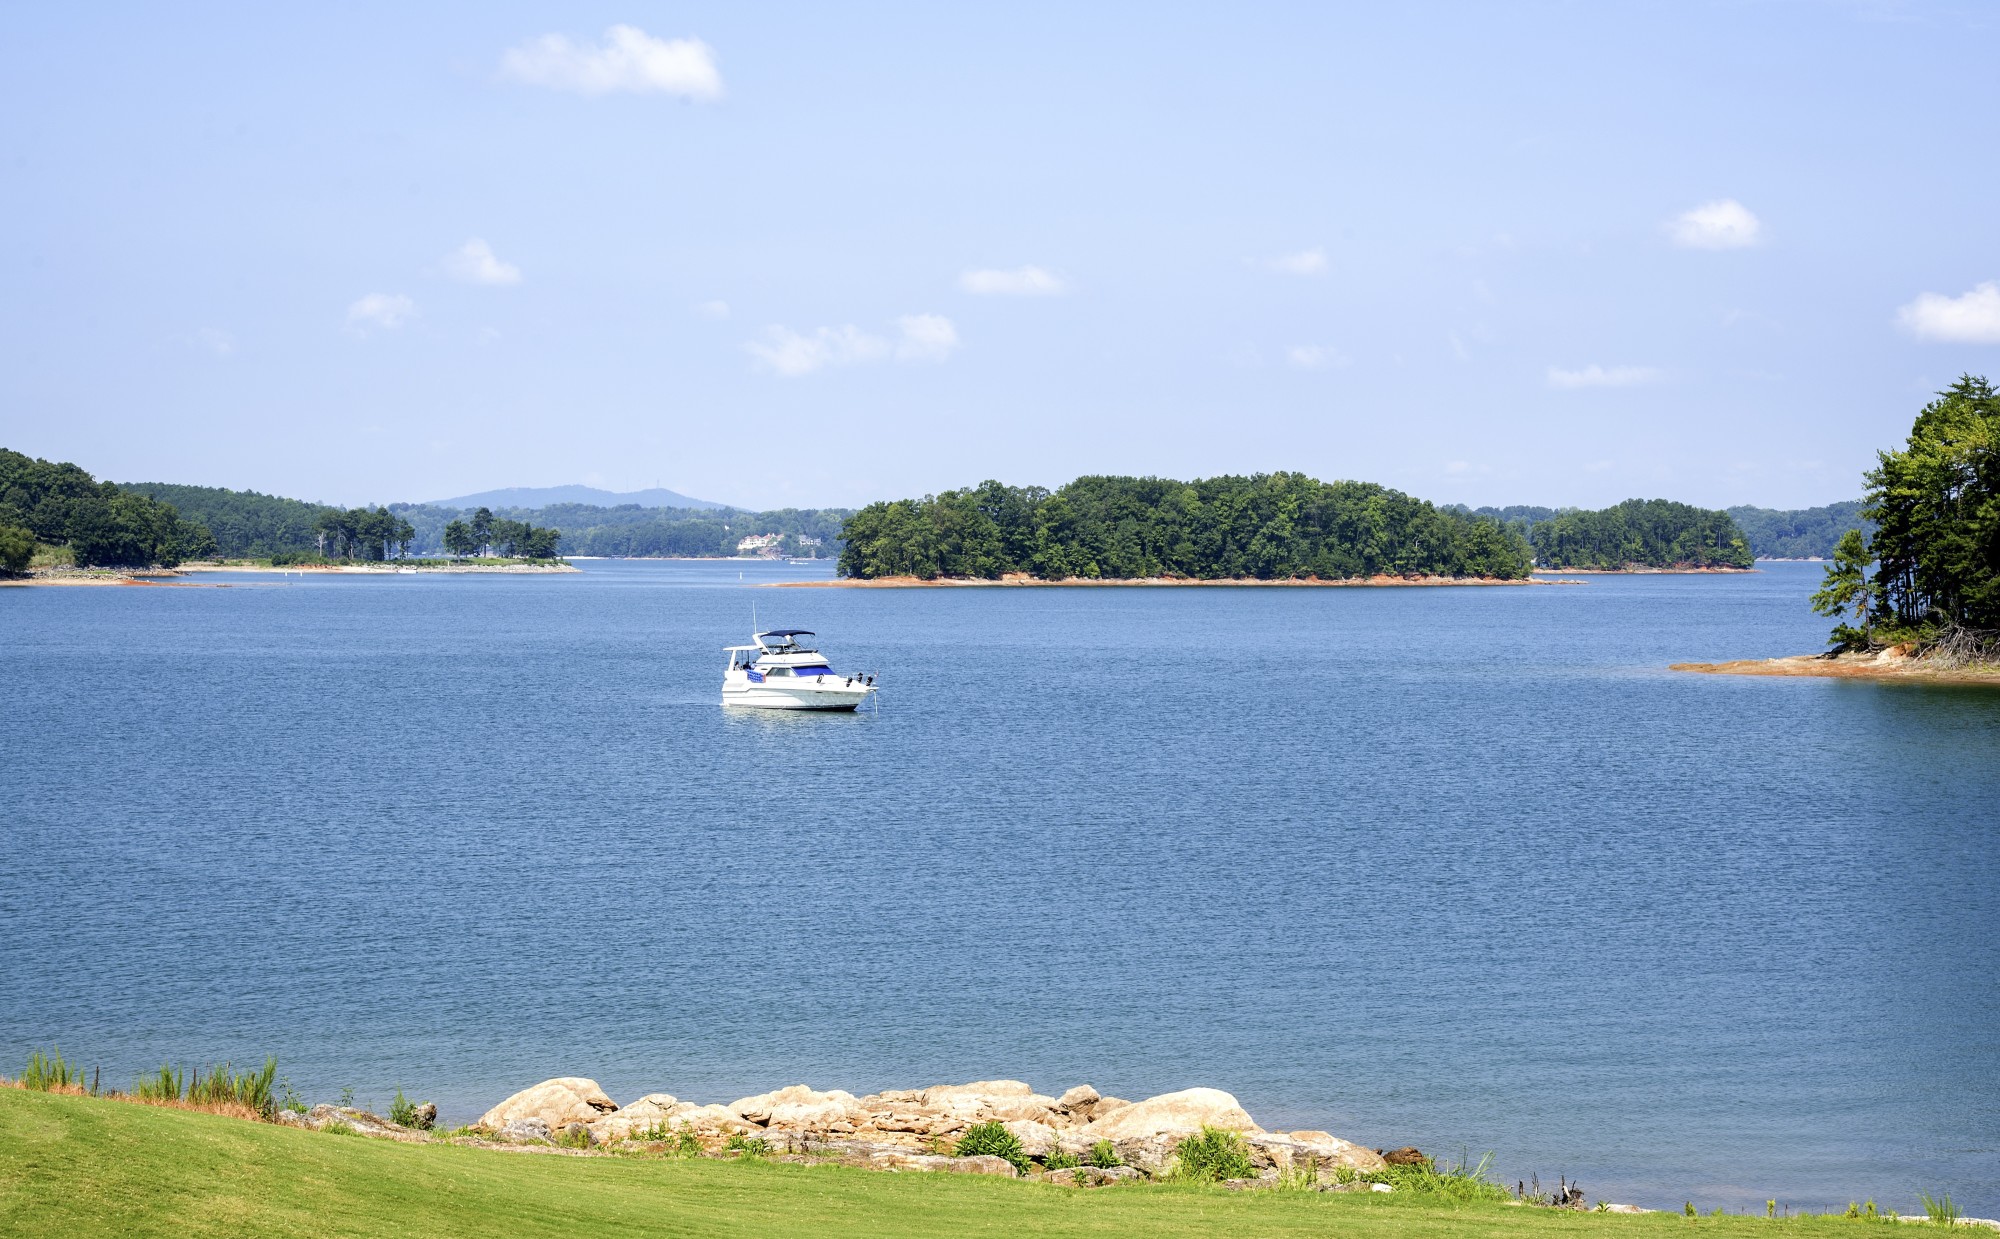 Some of your friends may point you to the best fishing spots at Lake Keowee. Where is Keowee Lake? This guide will help you locate it.